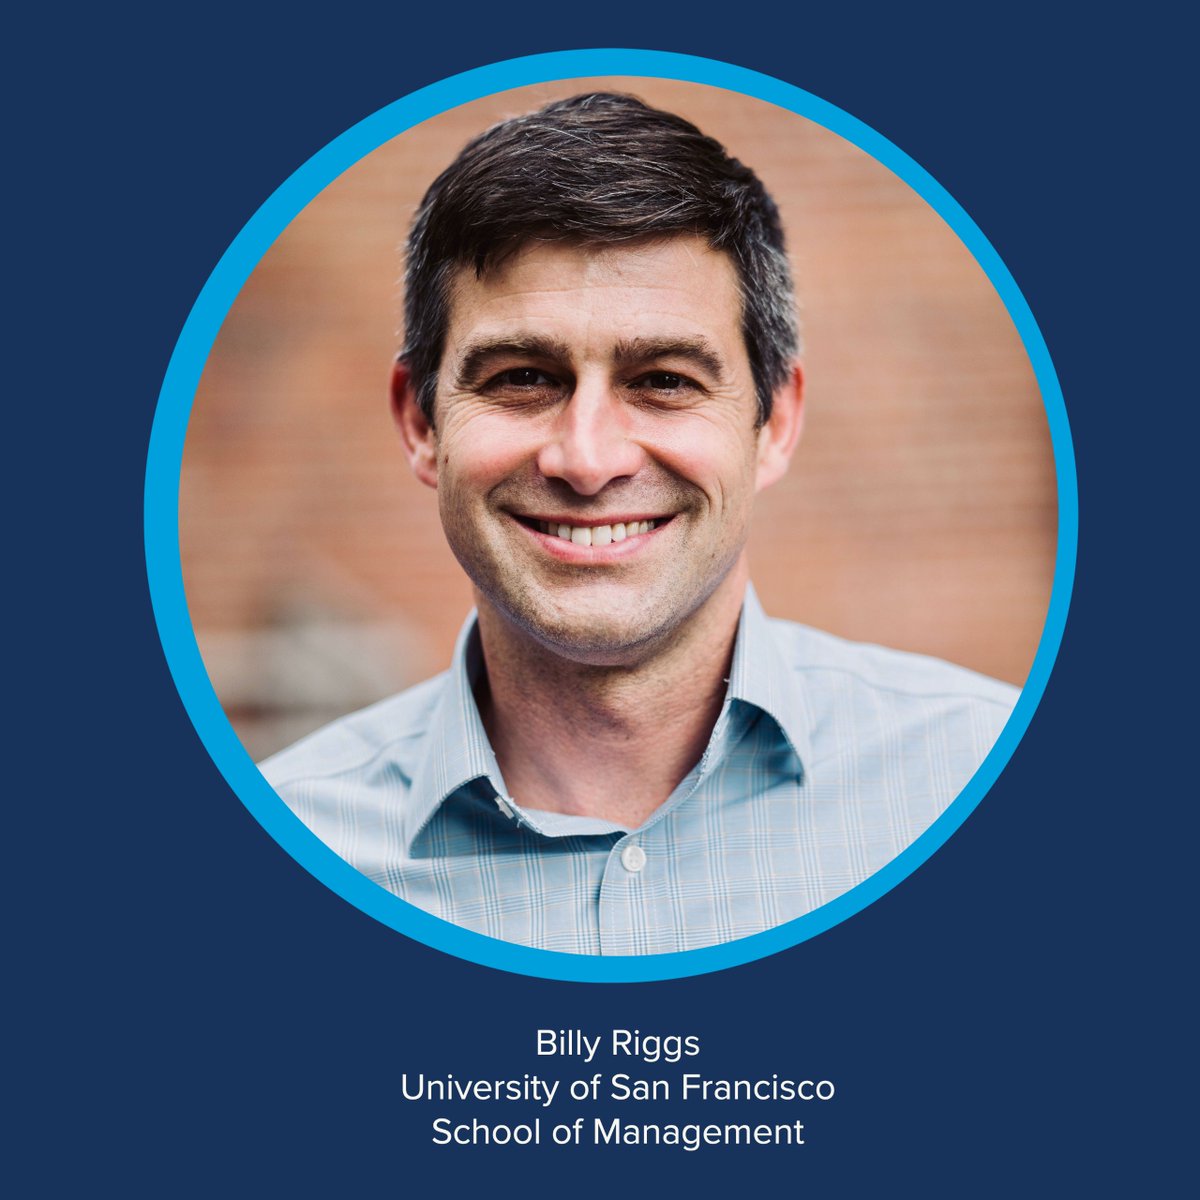 Prof. @billyriggs from @USFSOM sees autonomous vehicles everyday in San Francisco. How has this unique vantage point influenced his research on the topic?  He tells us in our recent #PAVEpanel. Watch: bit.ly/3MyOrgB